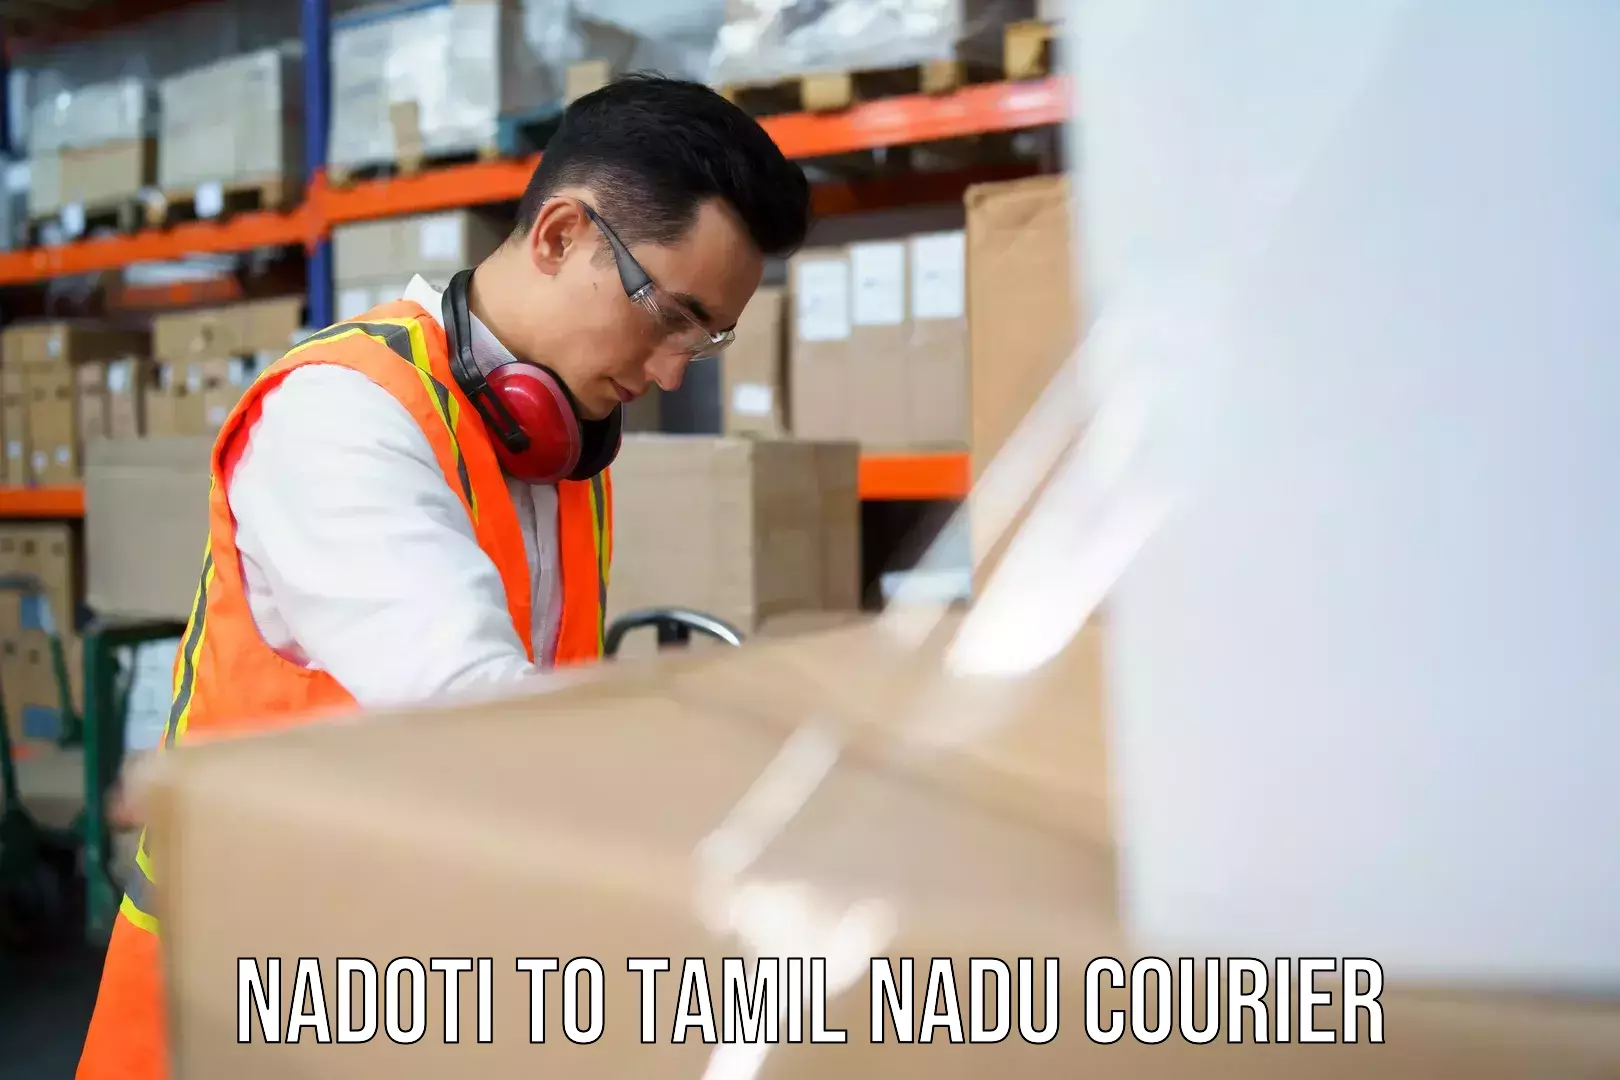 State-of-the-art courier technology Nadoti to Tamil Nadu